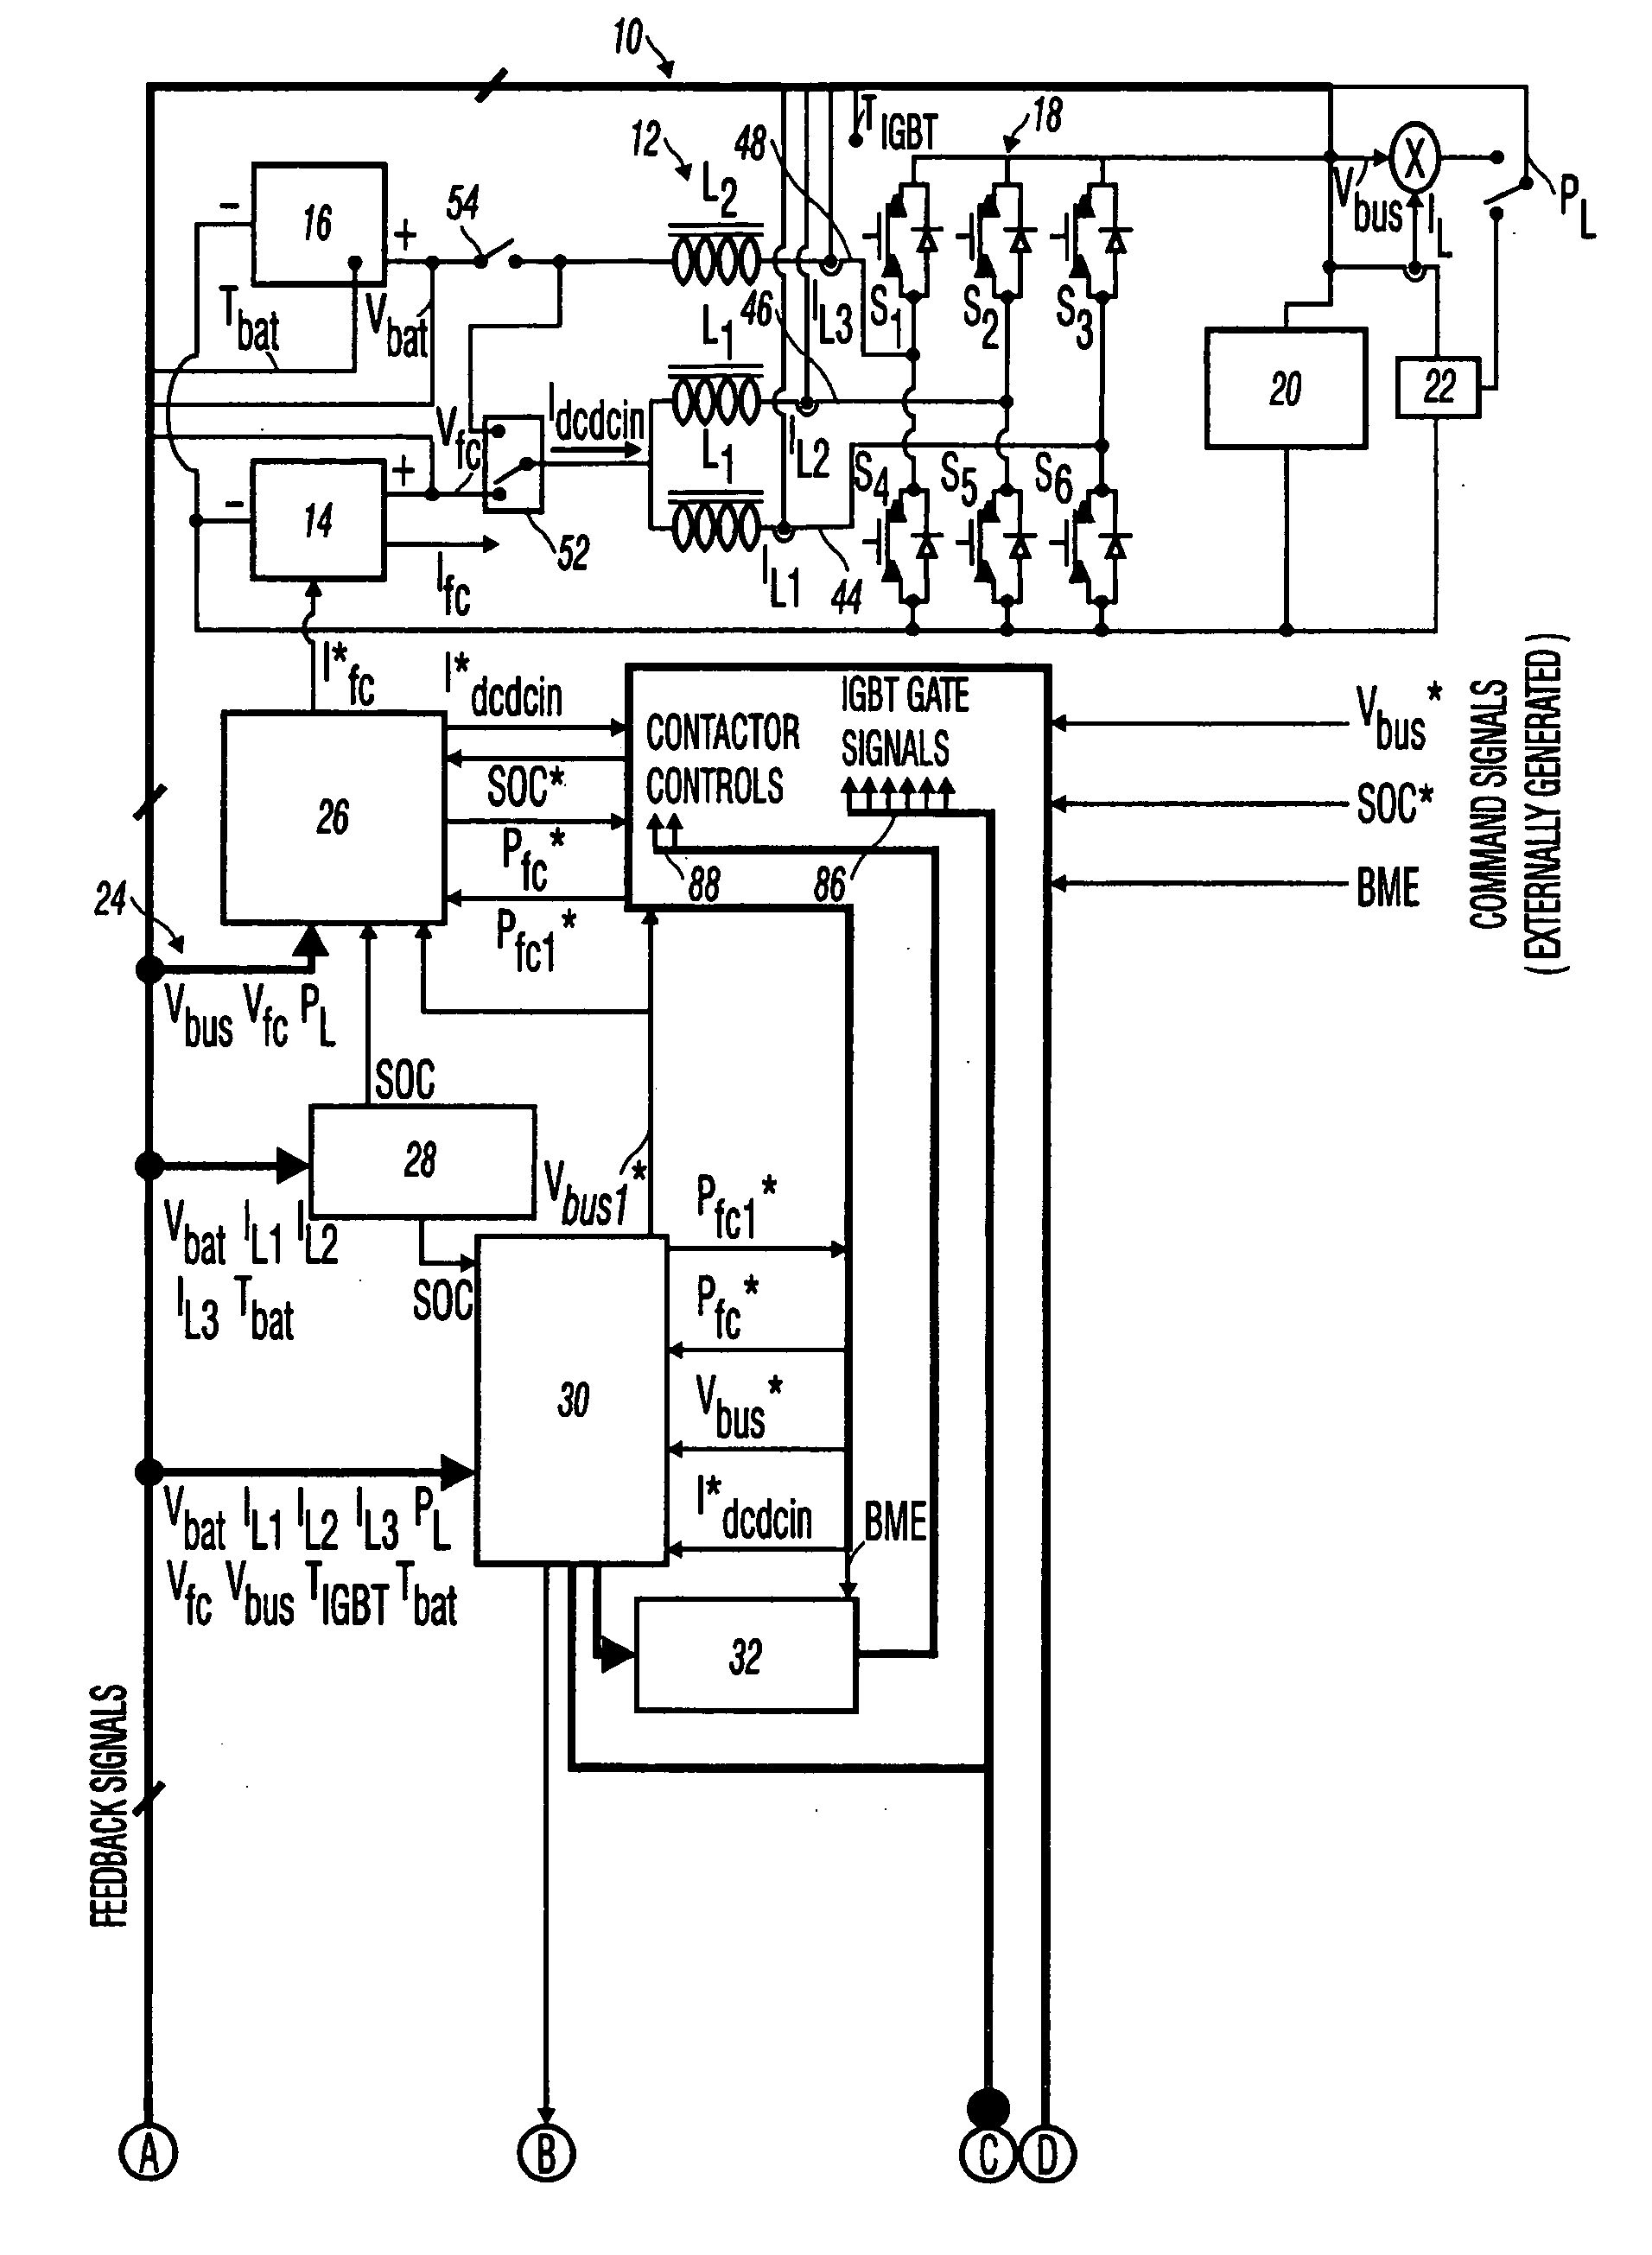 Direct current/direct current converter for a fuel cell system